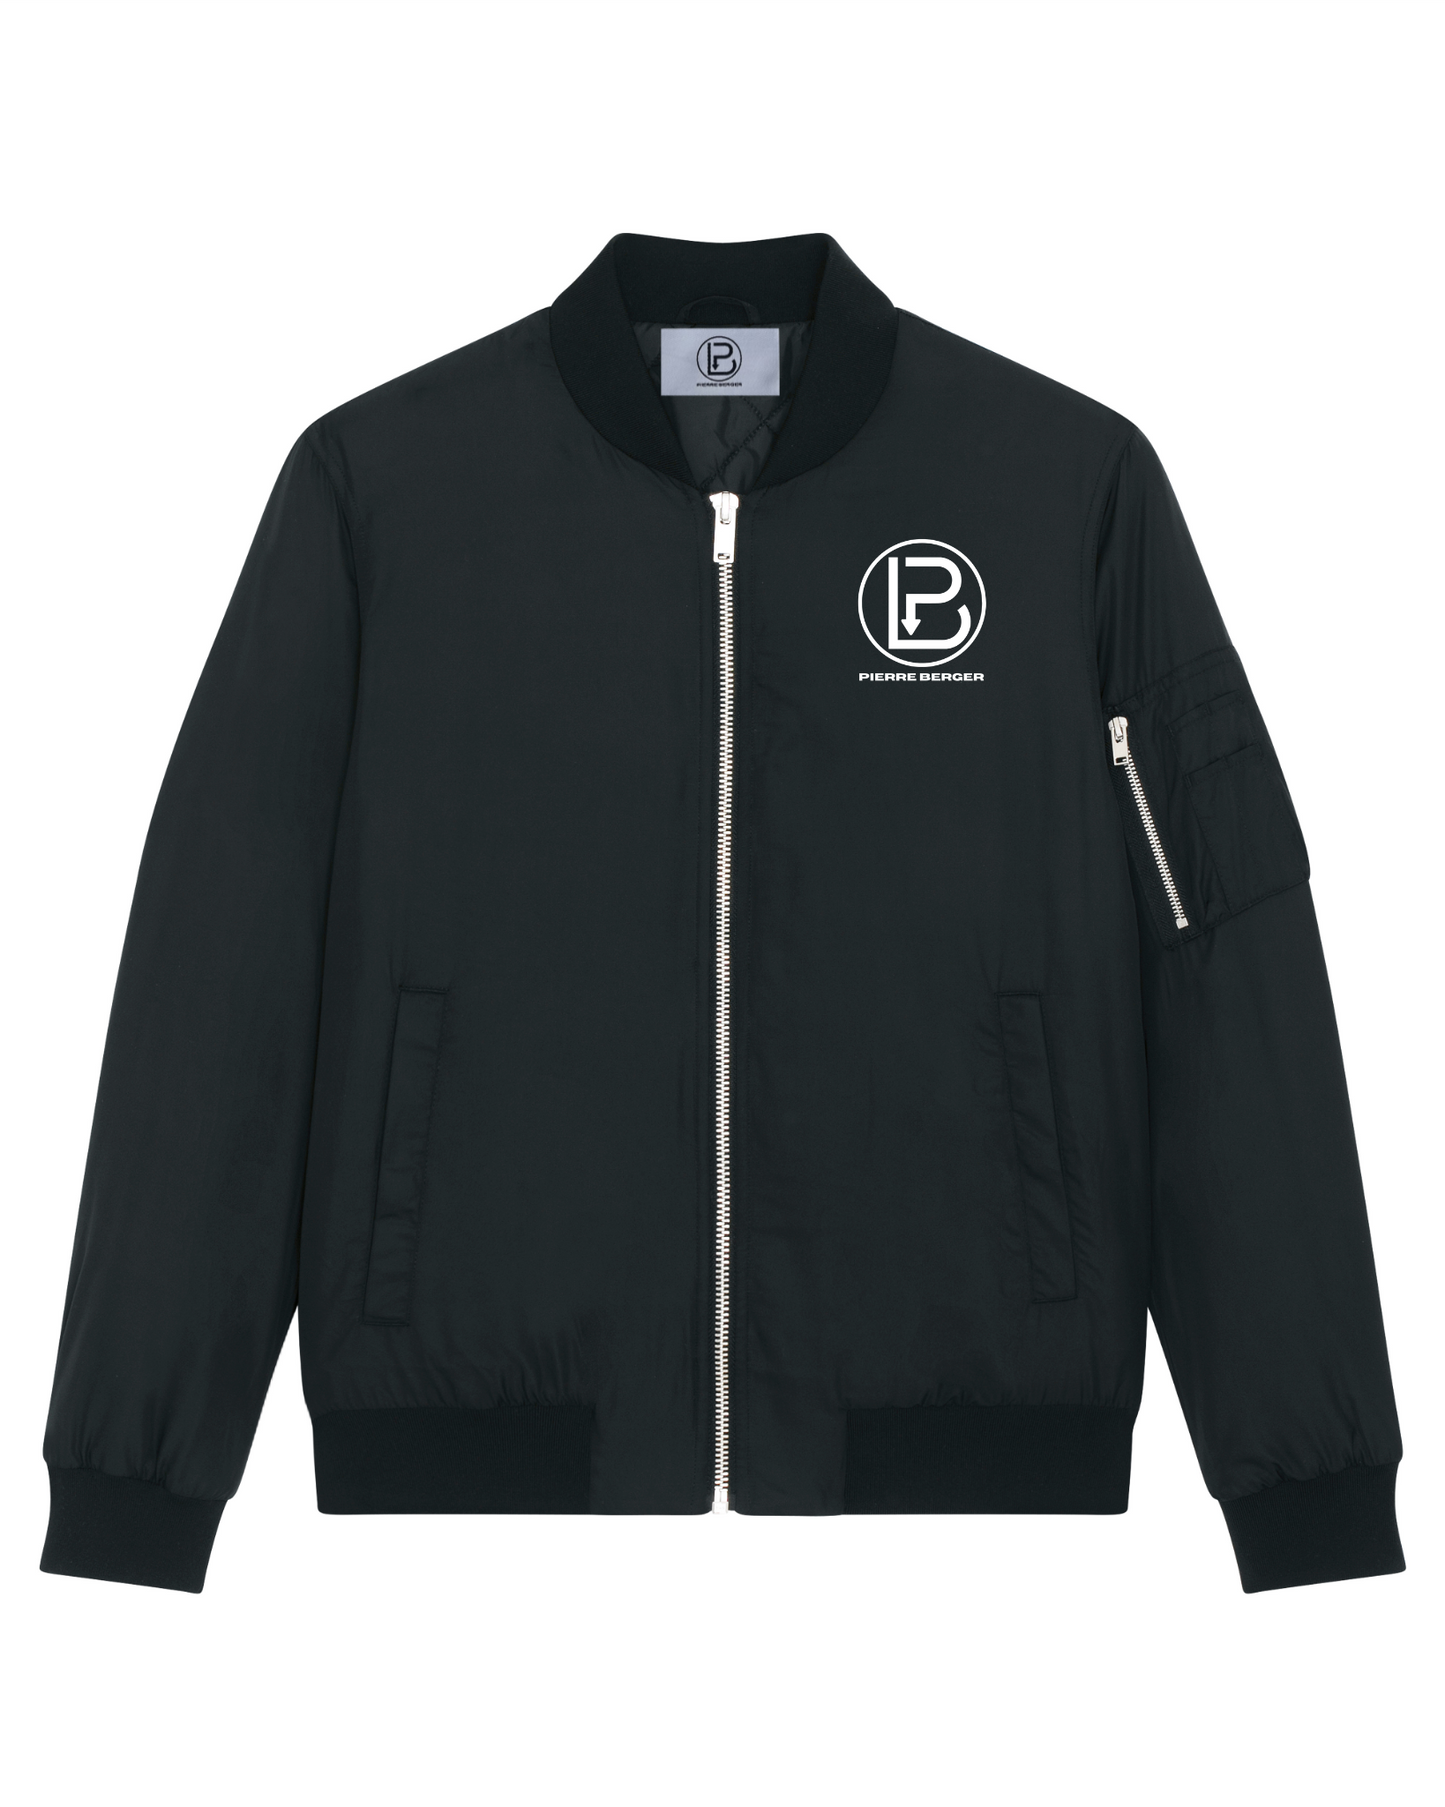 PIERRE BERGER - Unisex bomber jacket 100% recycled embroidery